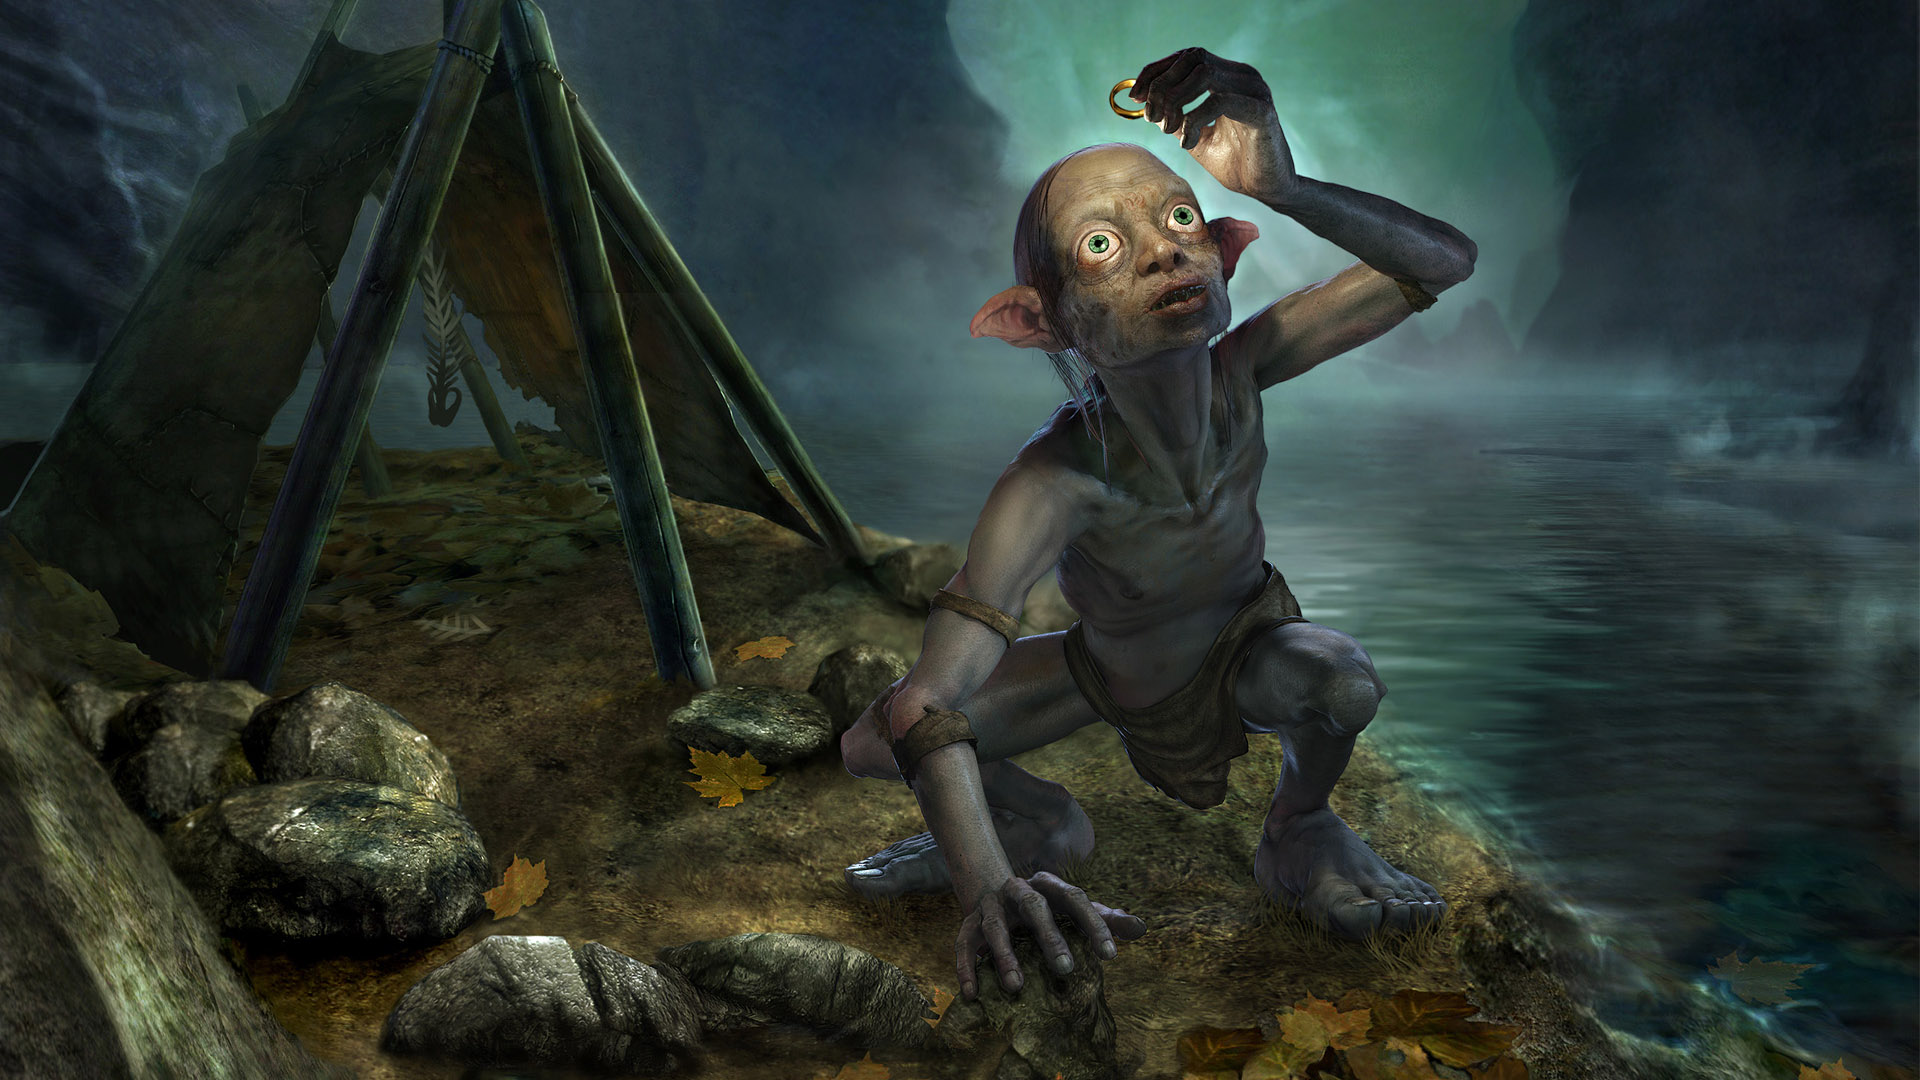 General 1920x1080 fantasy art digital art Gollum The Lord of the Rings creature The One Ring